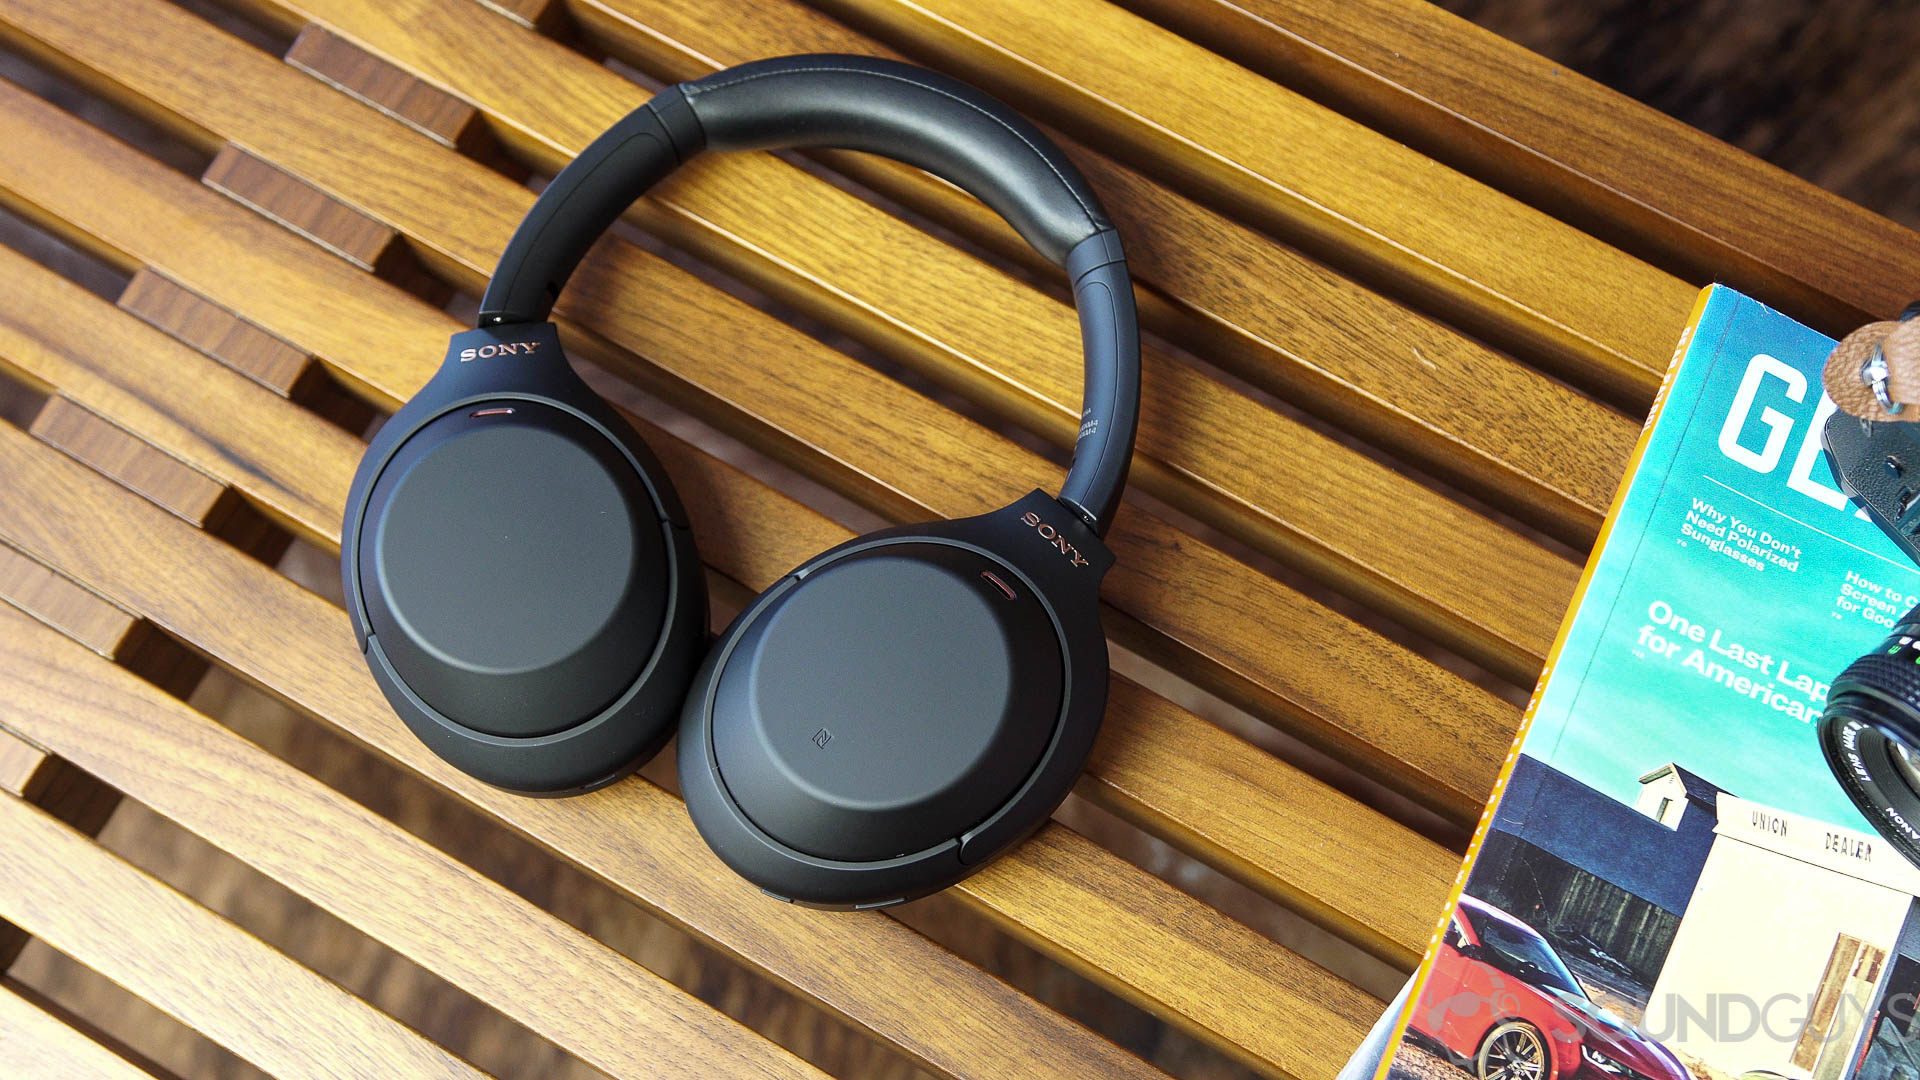 Sony WH-1000XM4 headphones next to magazines on a wood bench